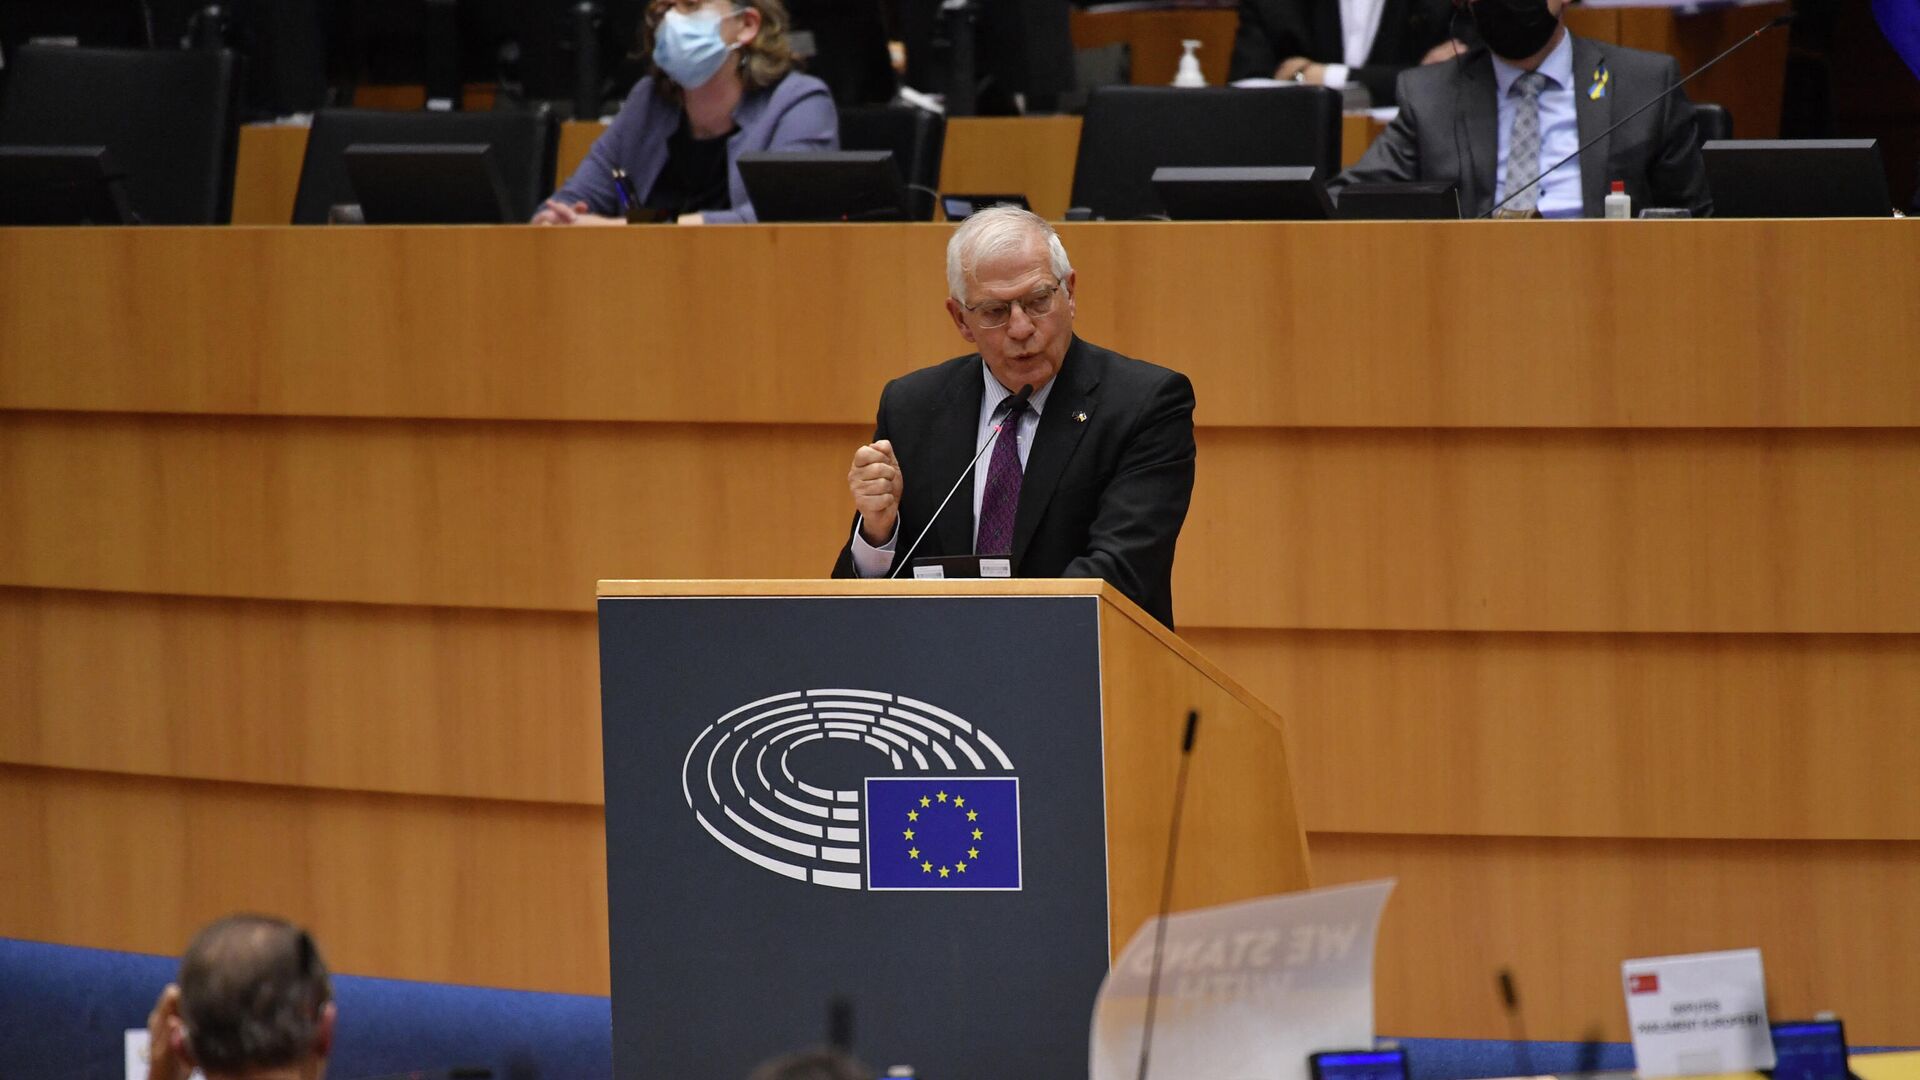 European Union for Foreign Affairs and Security Policy Josep Borrell (C) delivers a speech during a special plenary session of the European Parliament focused on the Russian special operation in Ukraine at the EU headquarters in Brussels, on 1 March 2022.  - Sputnik International, 1920, 22.05.2022